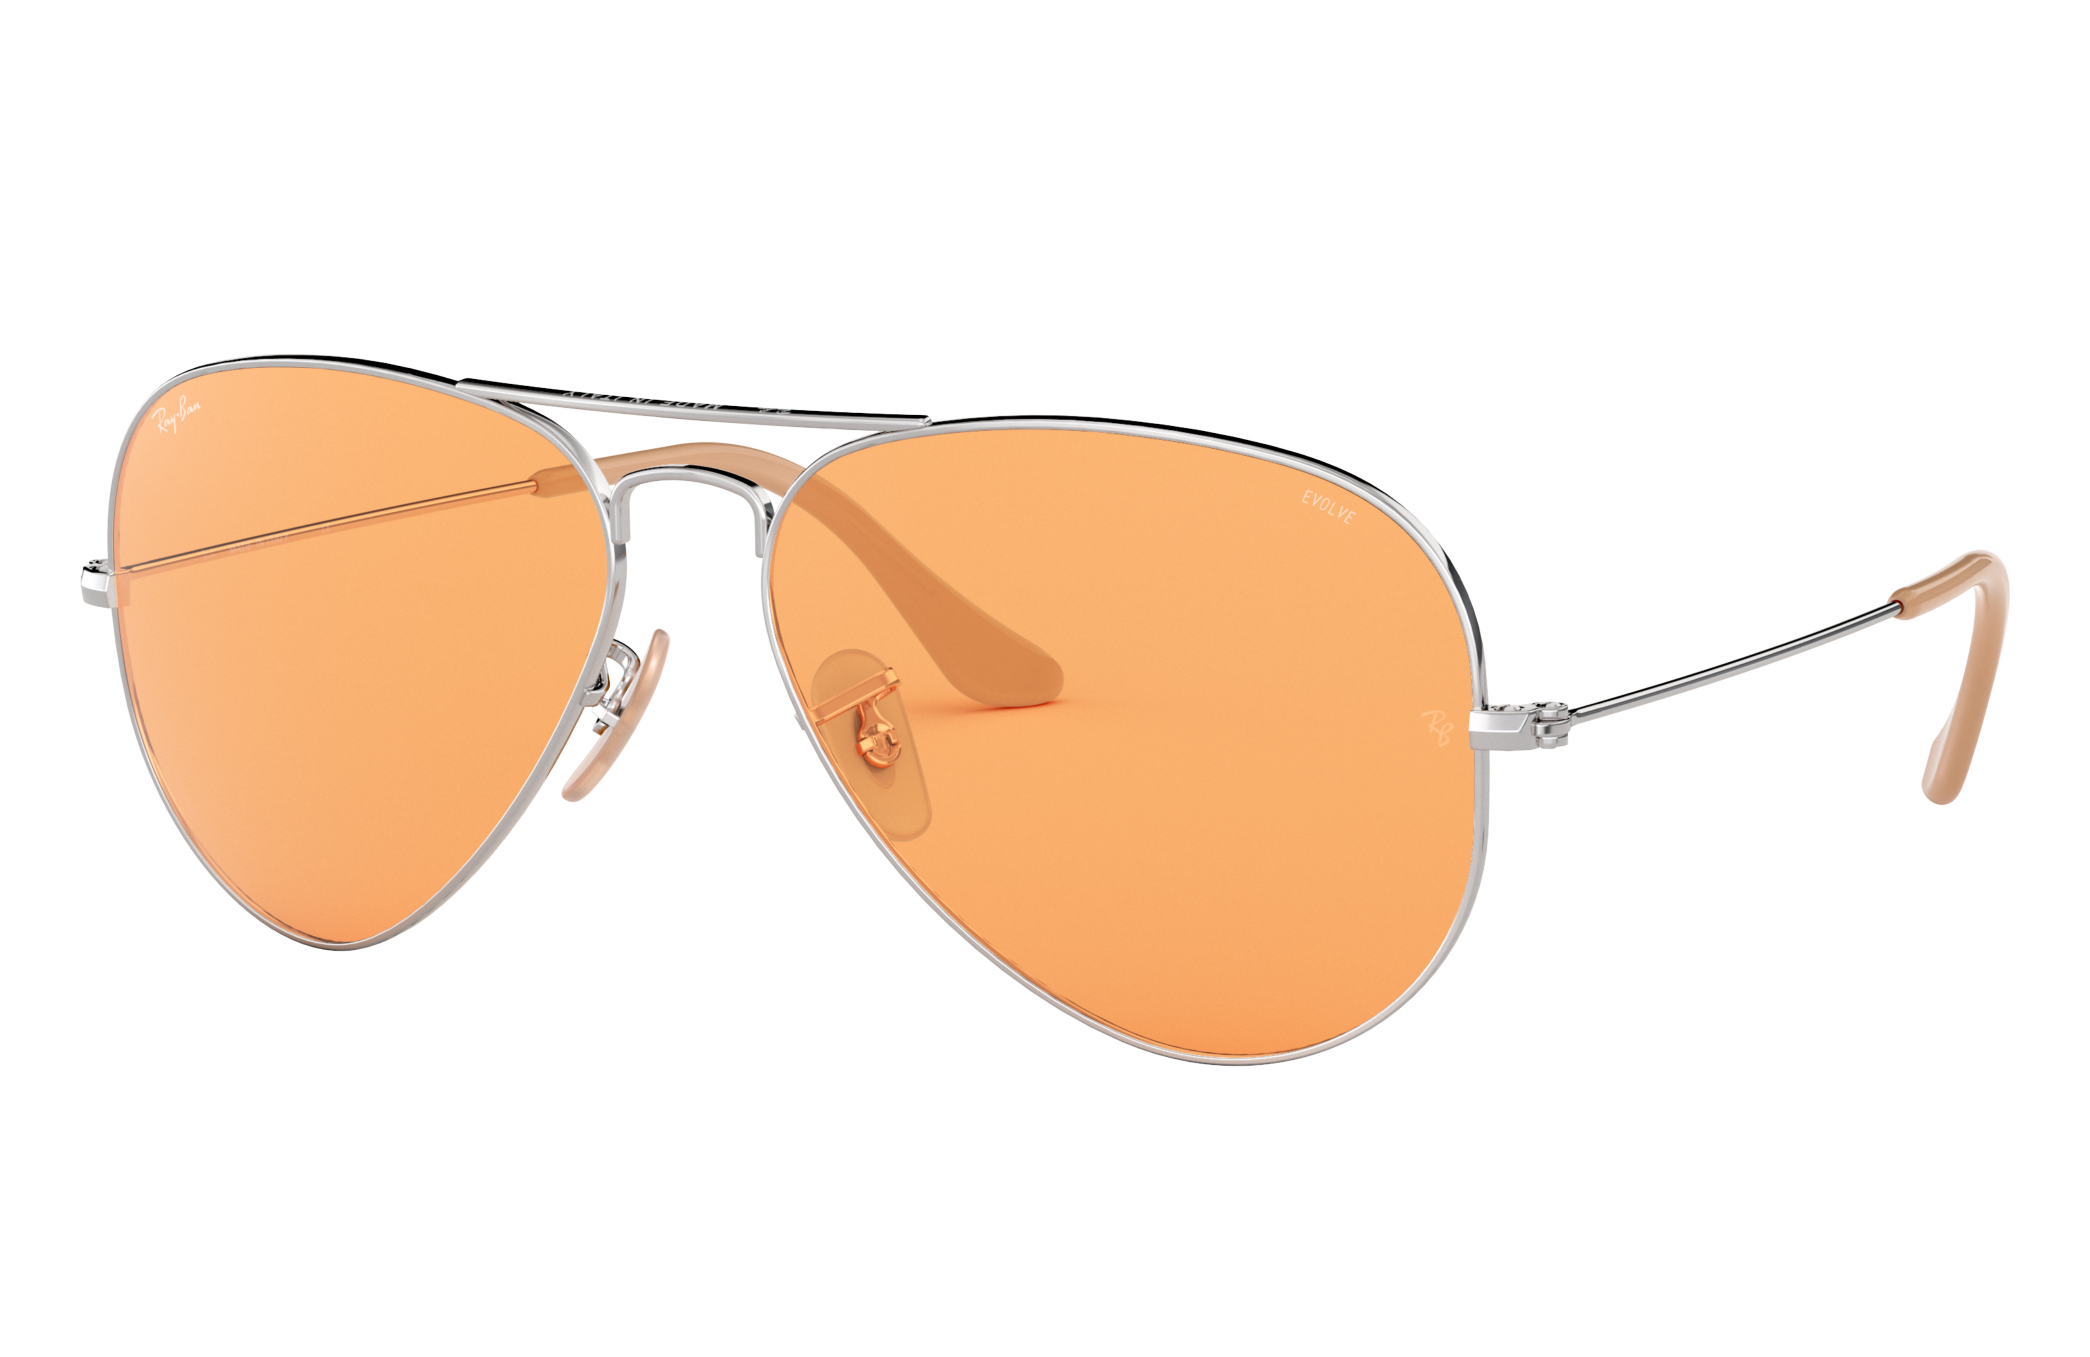 Silver Sunglasses in Orange Photochromic and Aviator Washed Evolve | Ray-Ban ®